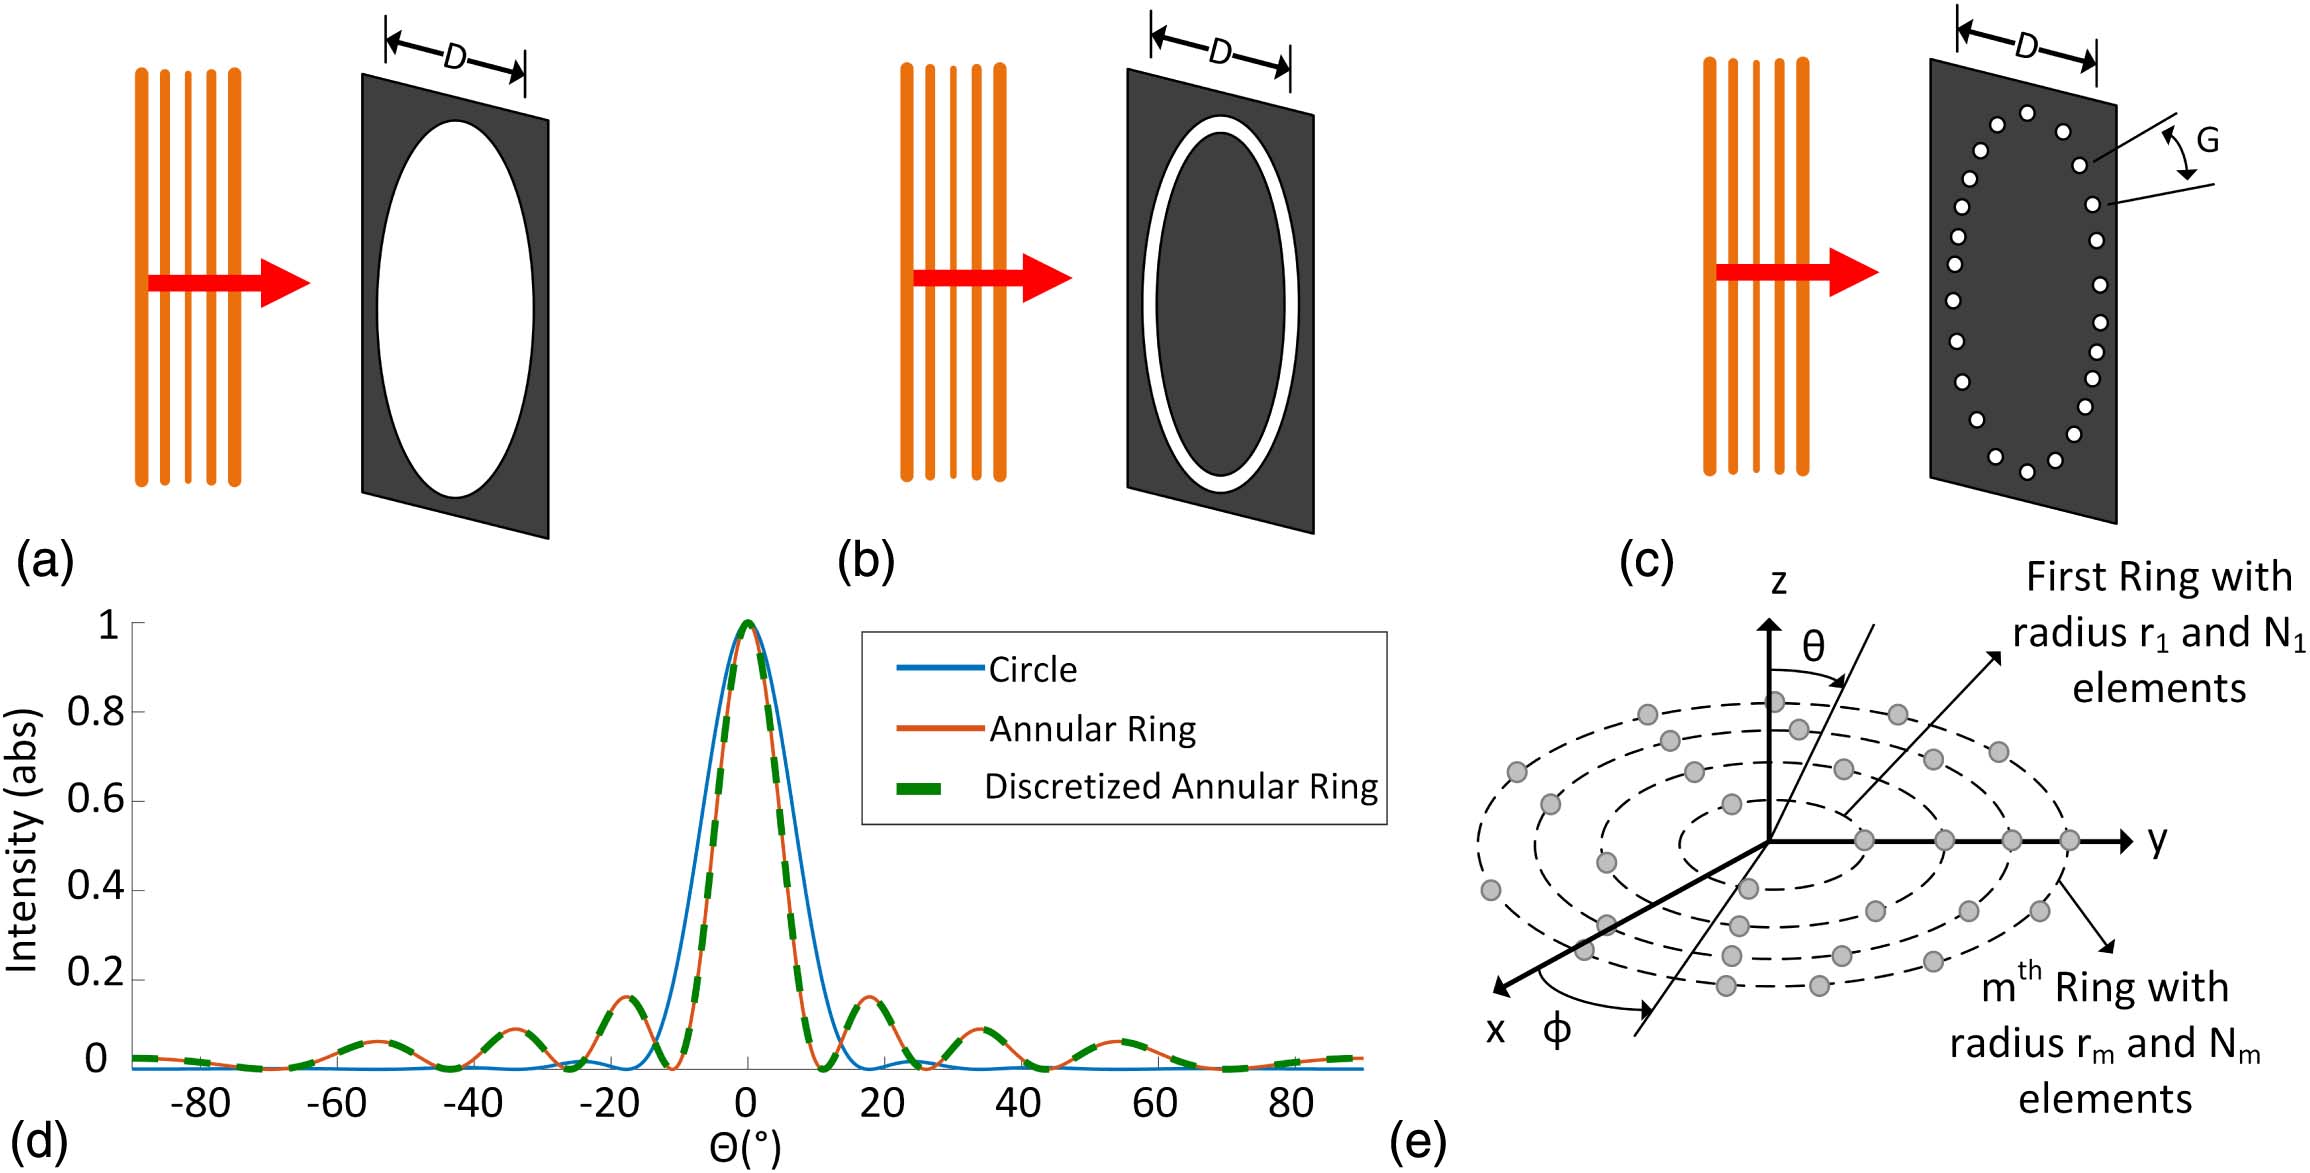 Diffraction pattern of circularly symmetric apertures with diameter D=2λ when illuminated by a plane wave. (a) Circular aperture. (b) Annular-ring aperture. (c) Discretization of the annular ring with 25 points. G≈λ/2 is the arc-length distance between two elements. (d) Diffraction pattern cross-section of apertures in (a), (b), and (c). (e) Generalization of discretized multi-annular-ring apertures equivalent to circular-grid phased arrays.